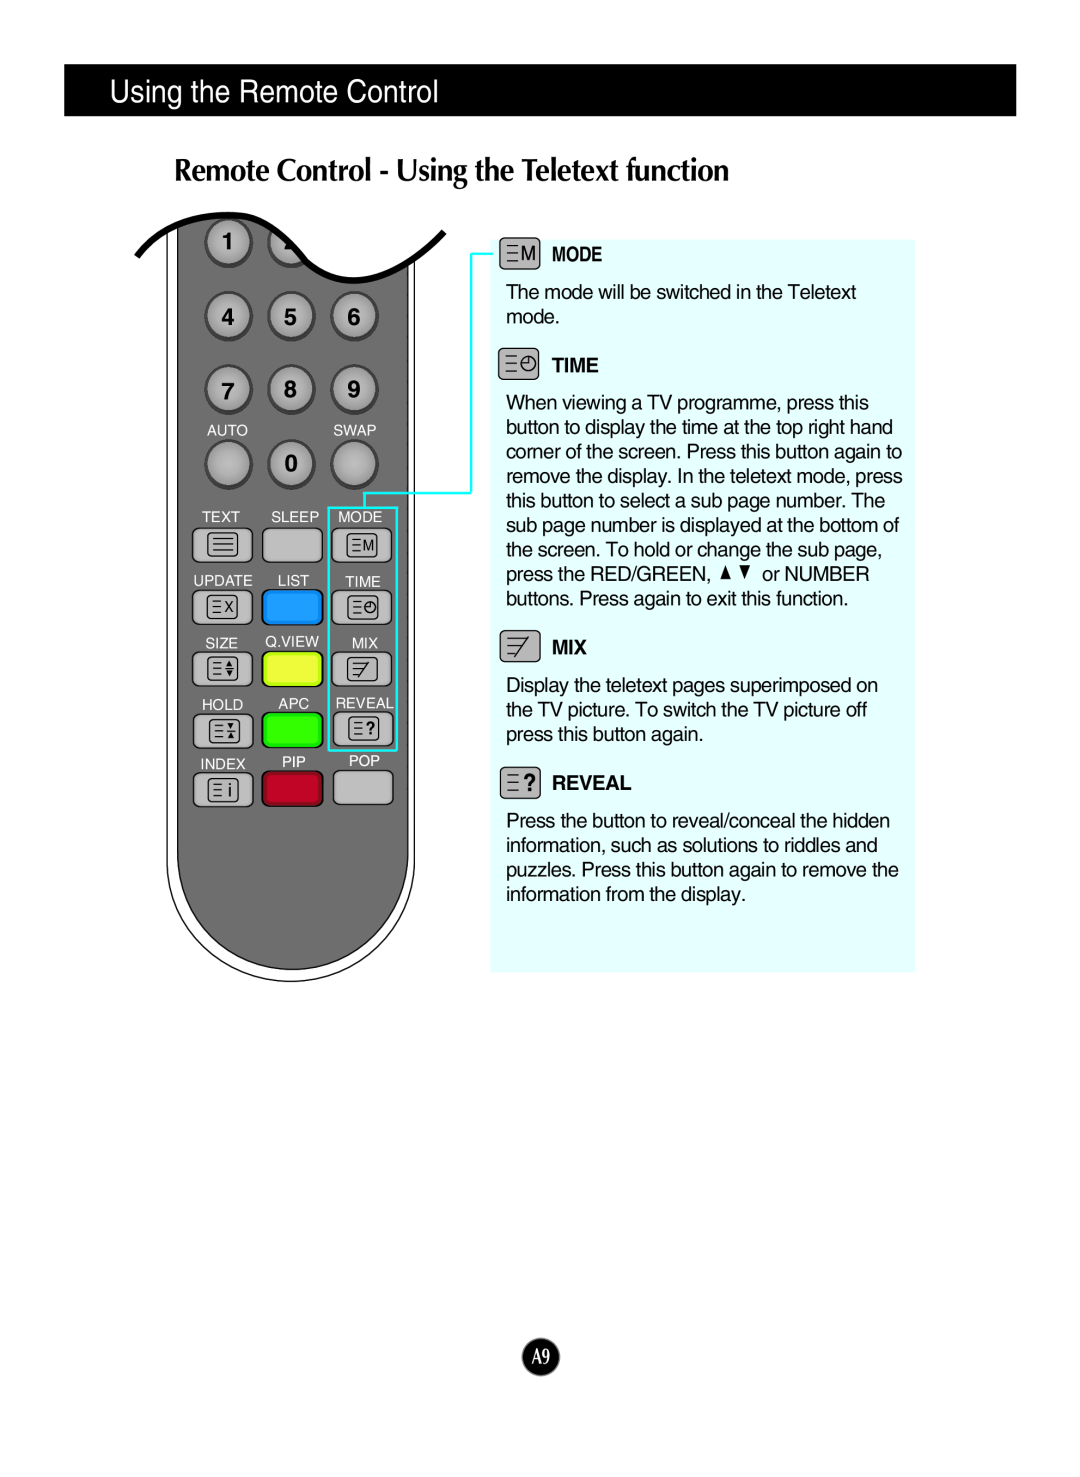 LG Electronics L2323T manual Using the Remote Control, Remote Control - Using the Teletext function, Mode, Time, Reveal 